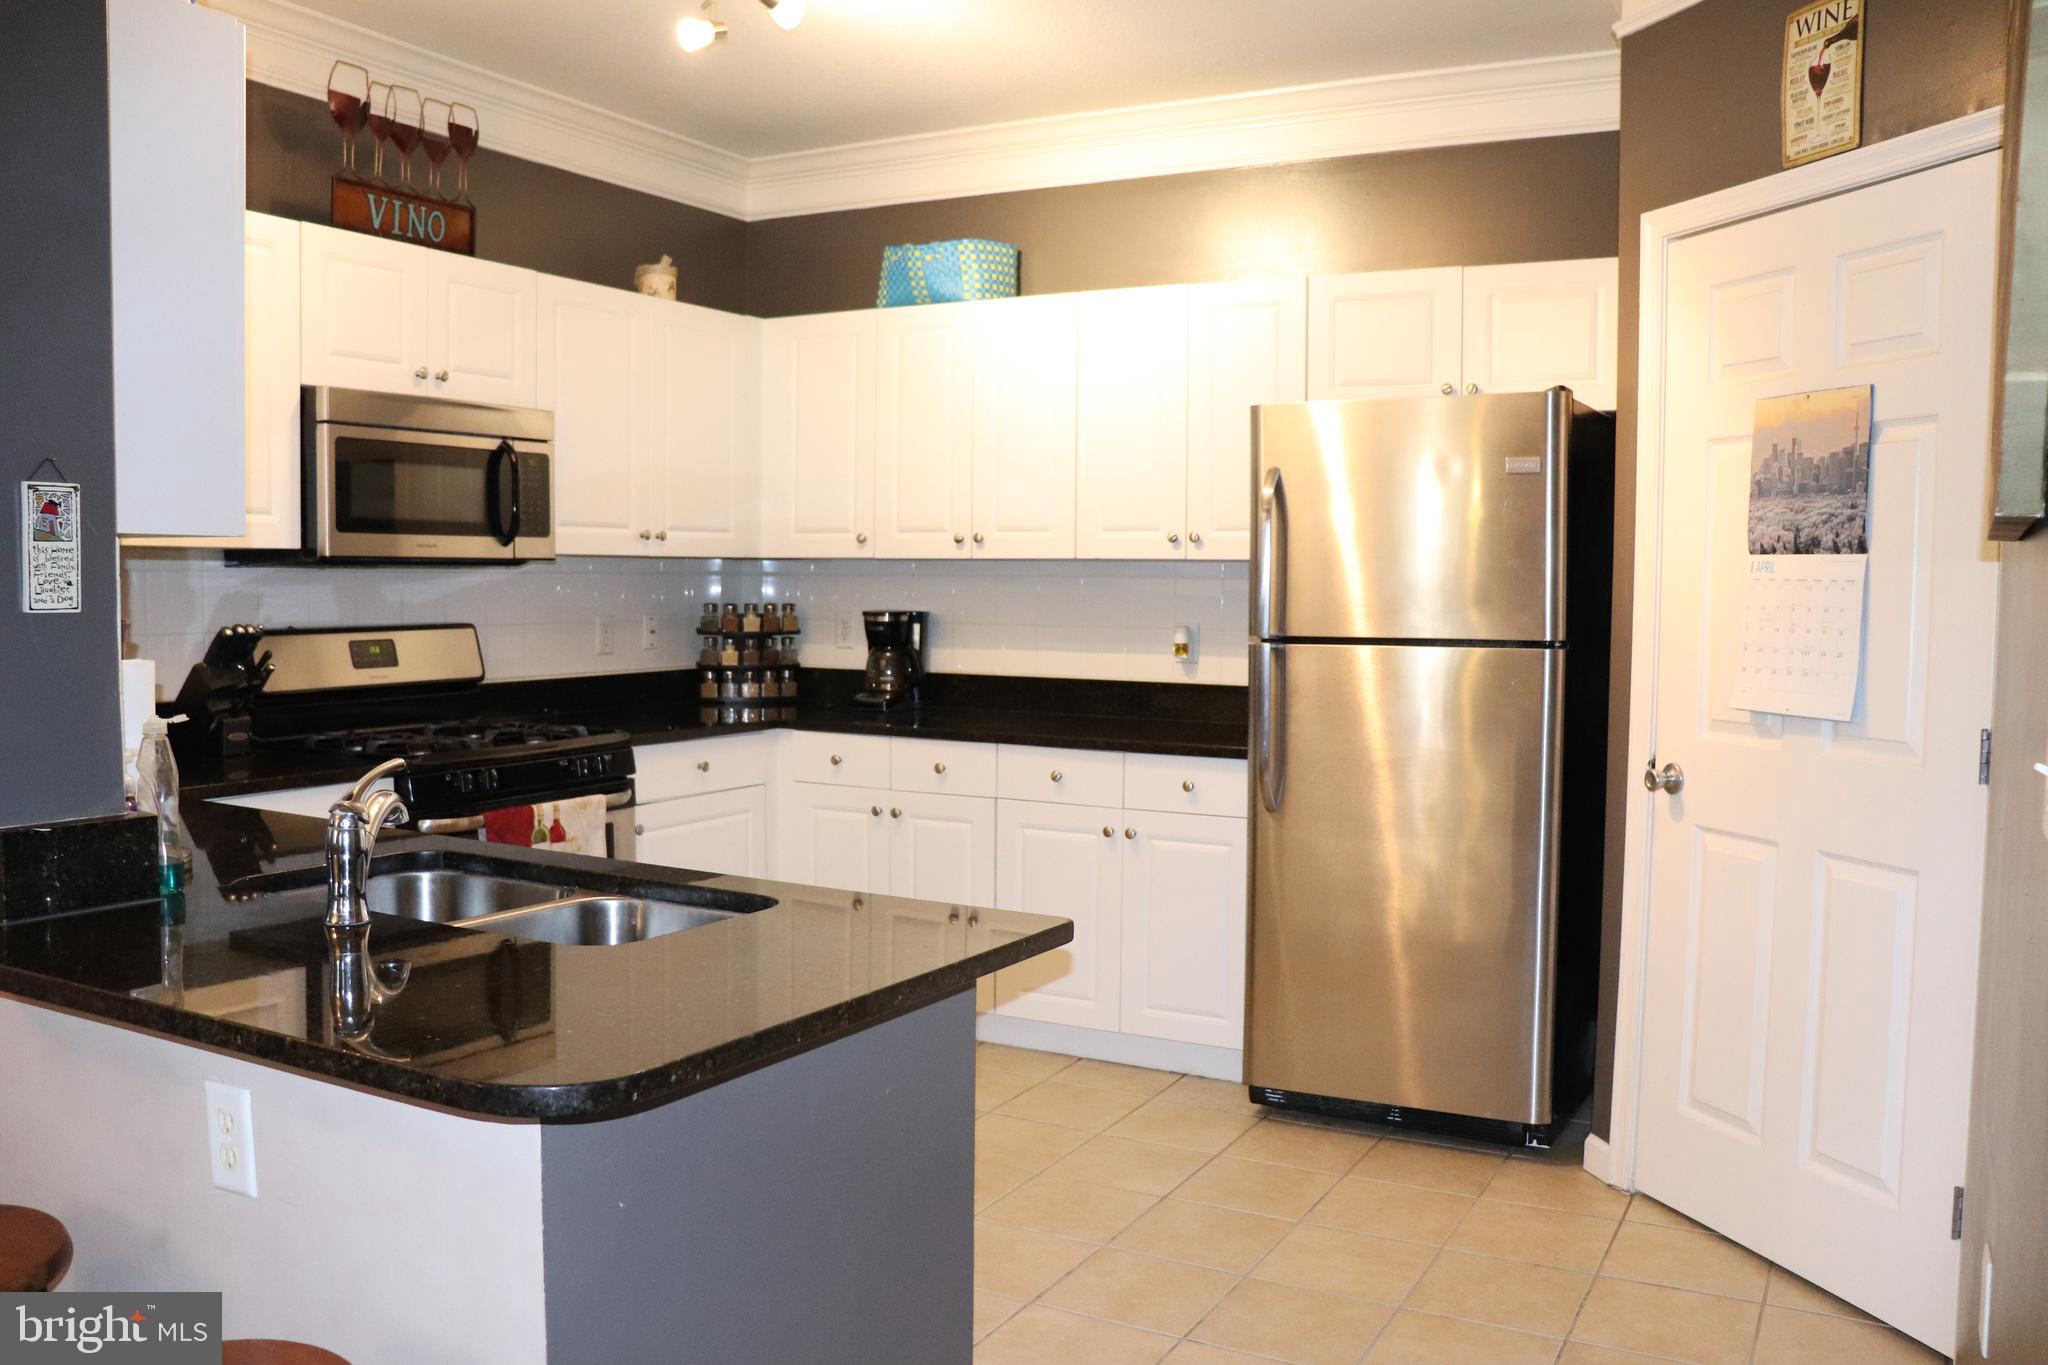 a kitchen with stainless steel appliances a refrigerator a sink a stove a microwave and a refrigerator